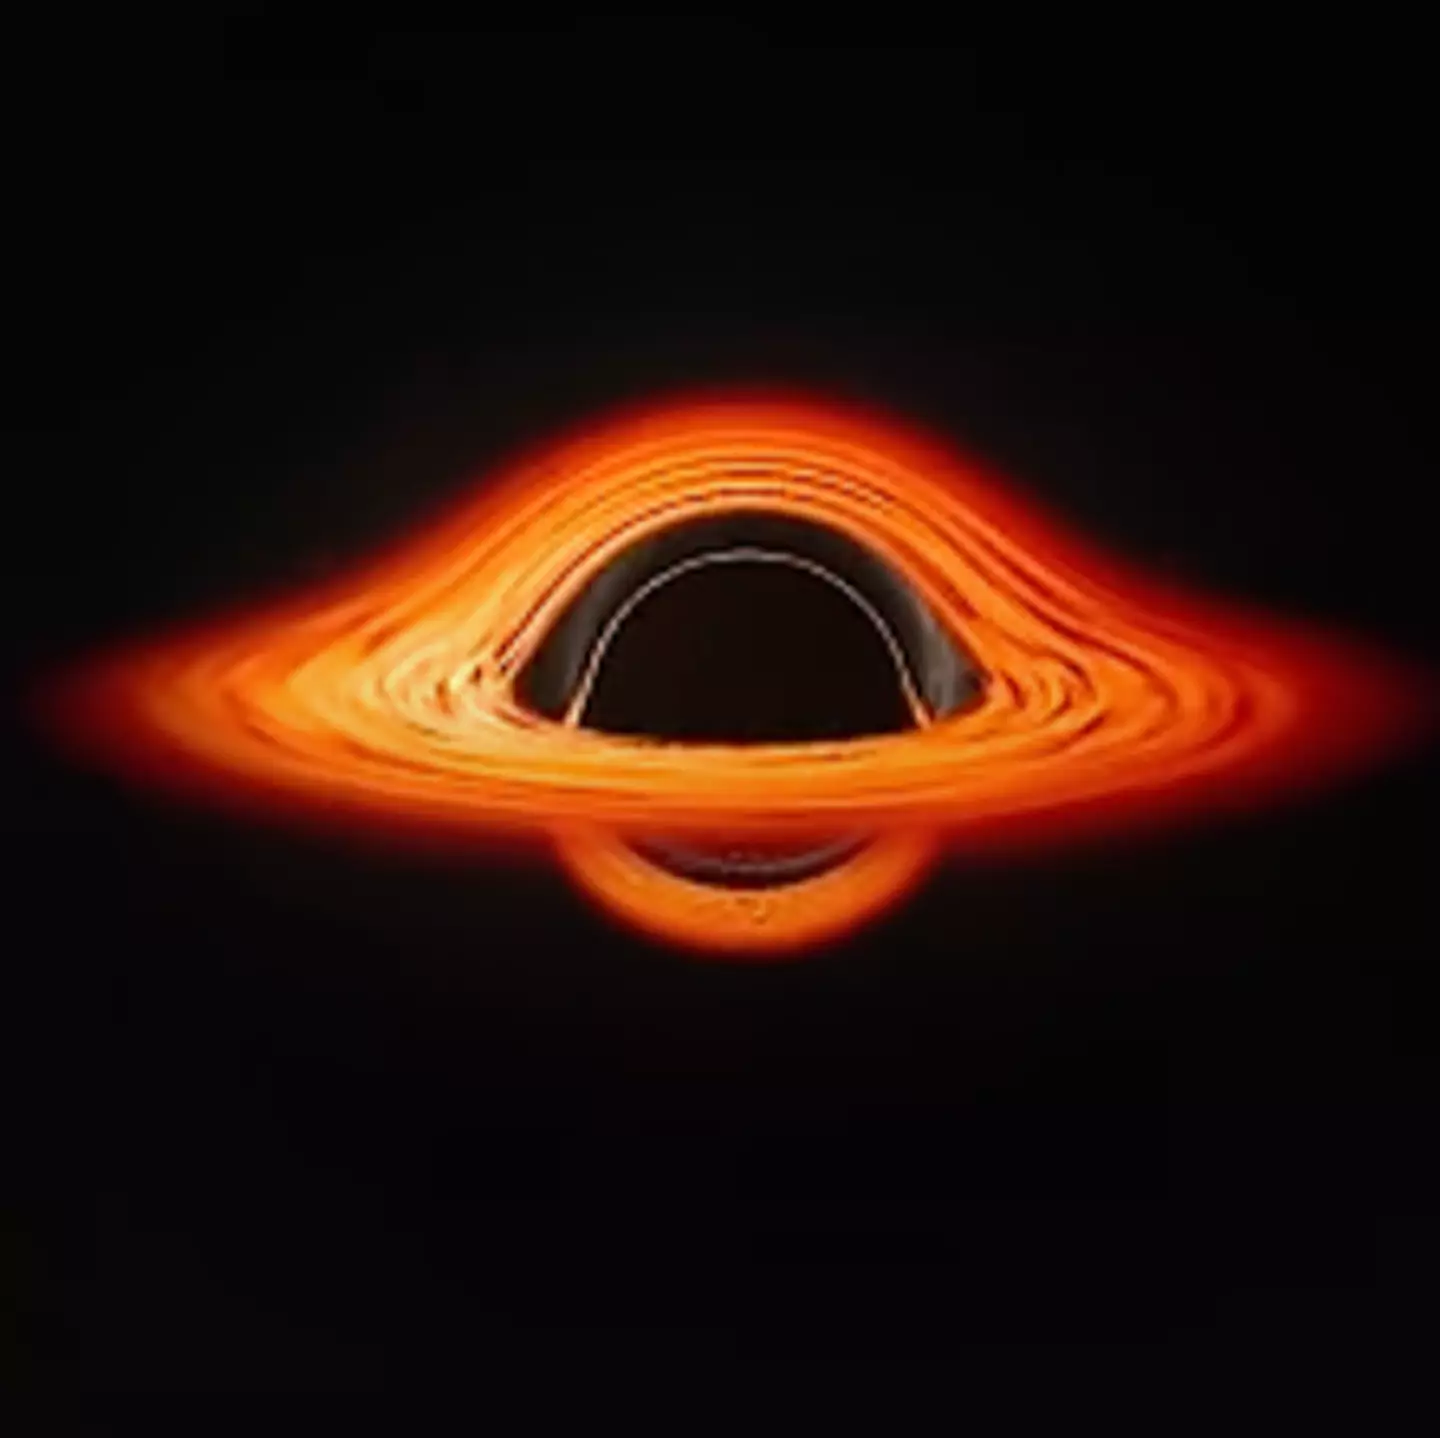 People can’t stop watching ‘mesmerizing’ simulation of what it would be like plunging into black hole